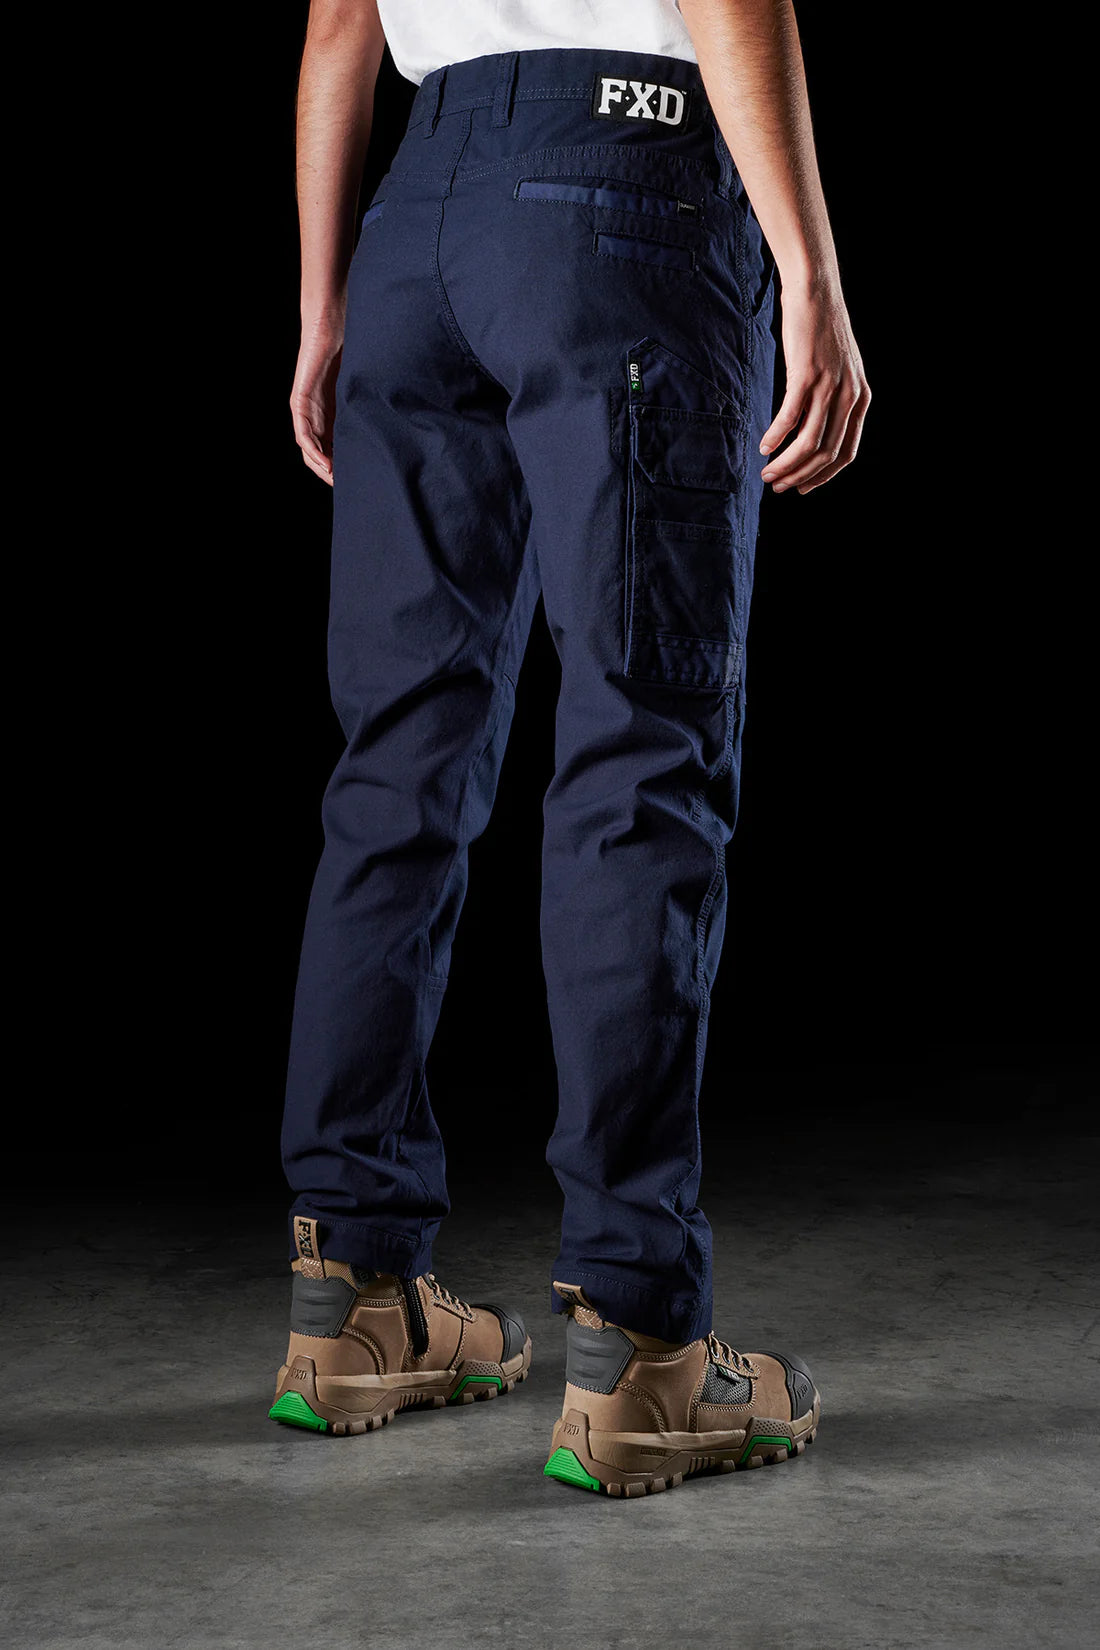 Ladies Stretch Work Pants - made by FXD Workwear